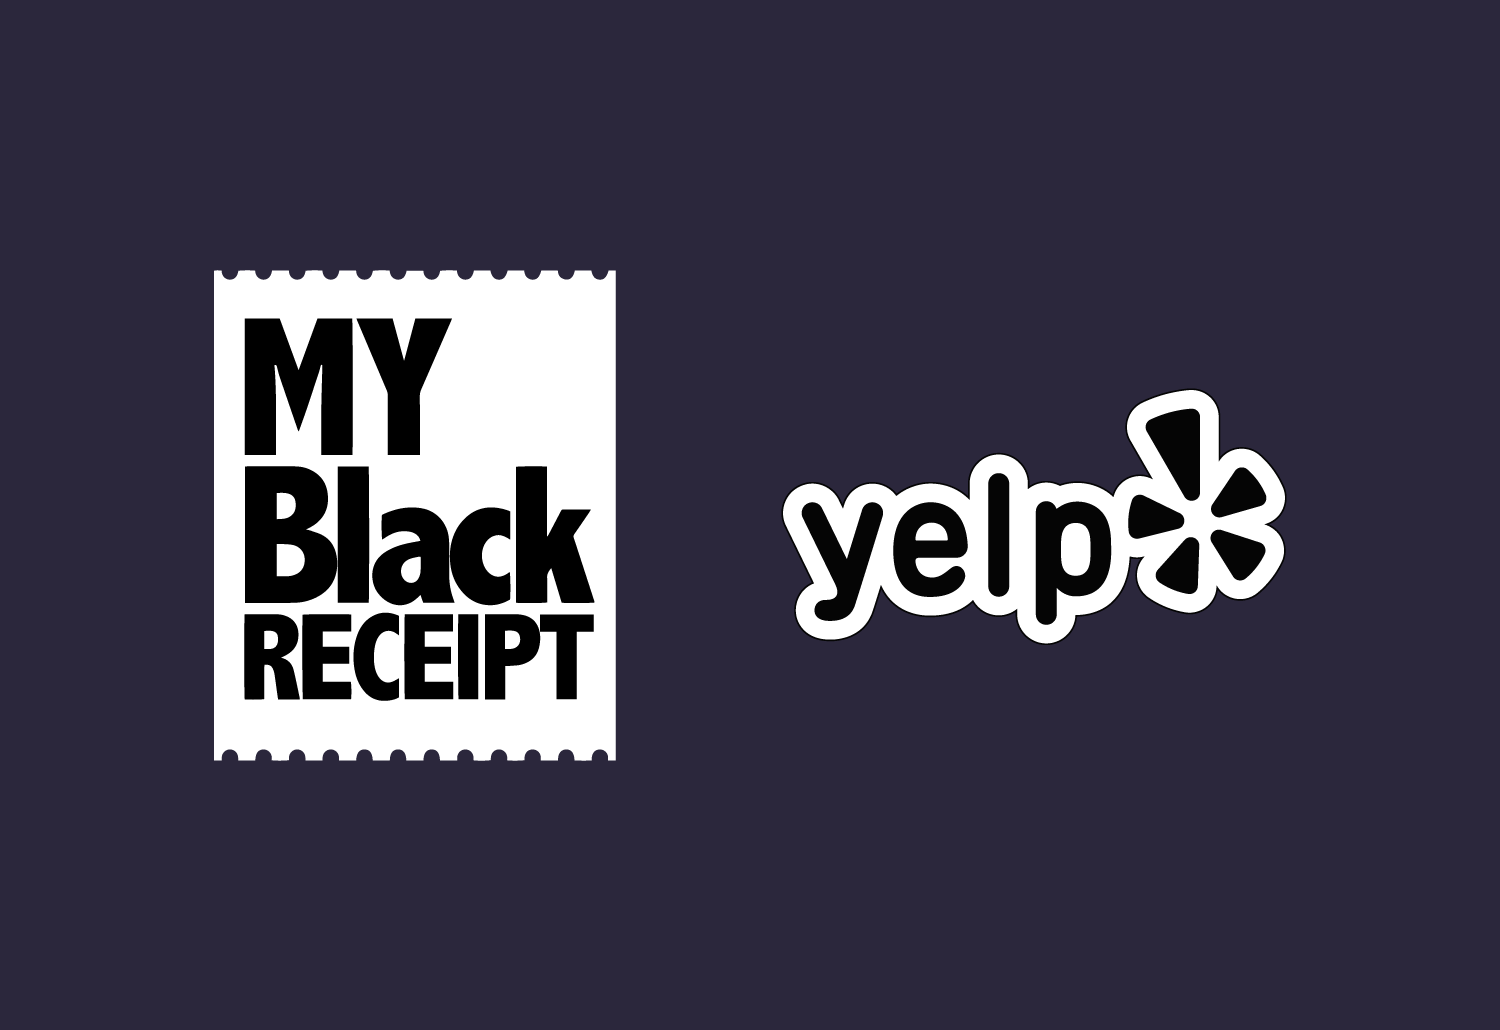 Yelp Officially Launches Black-owned Attribute in Partnership with My Black Receipt